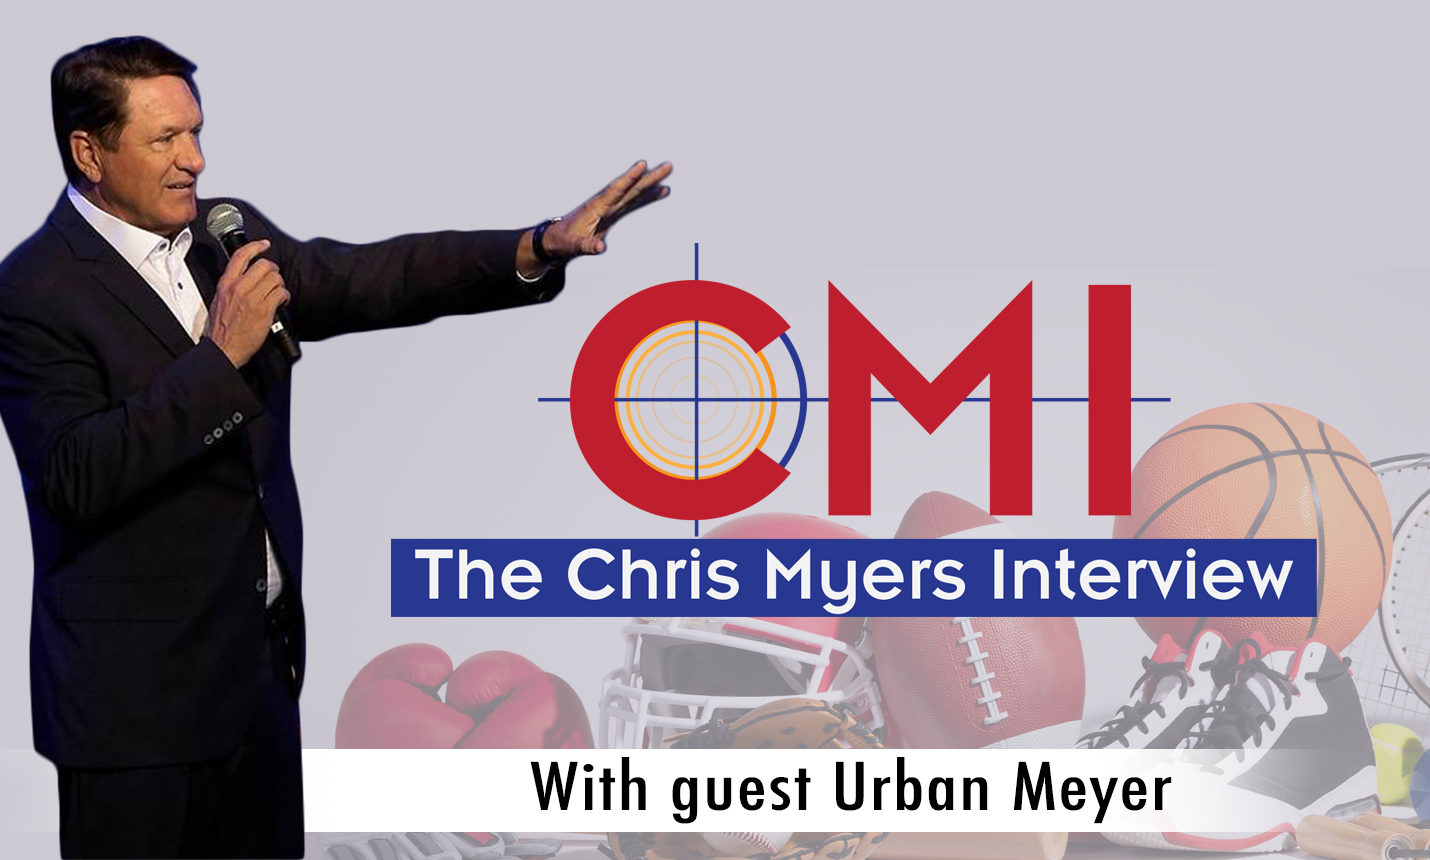 The Chris Myers Interview